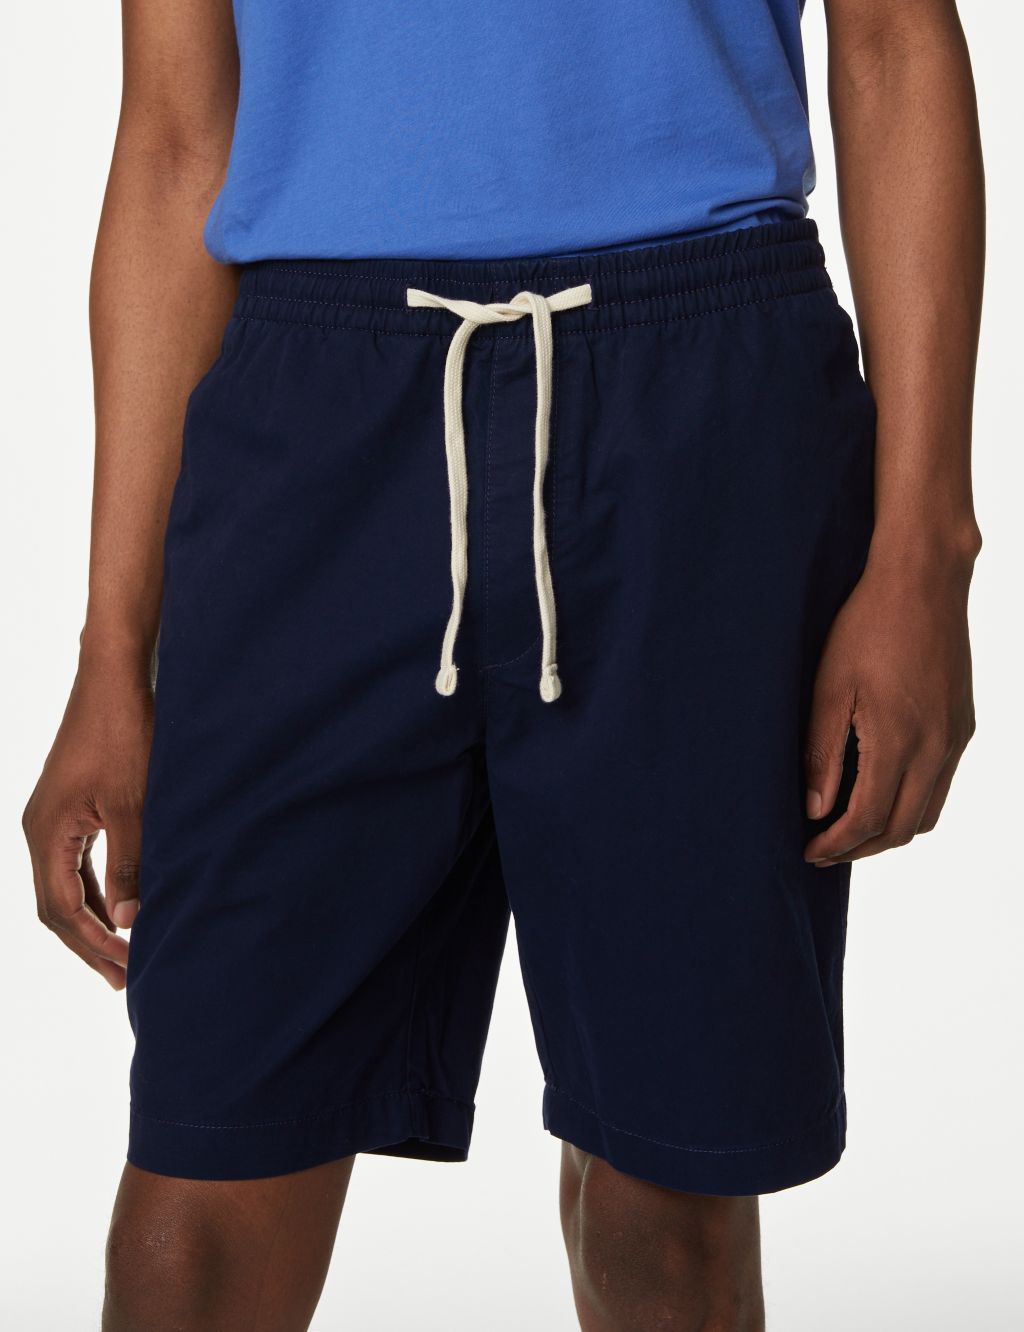 Double Layer Training Shorts, Goodmove